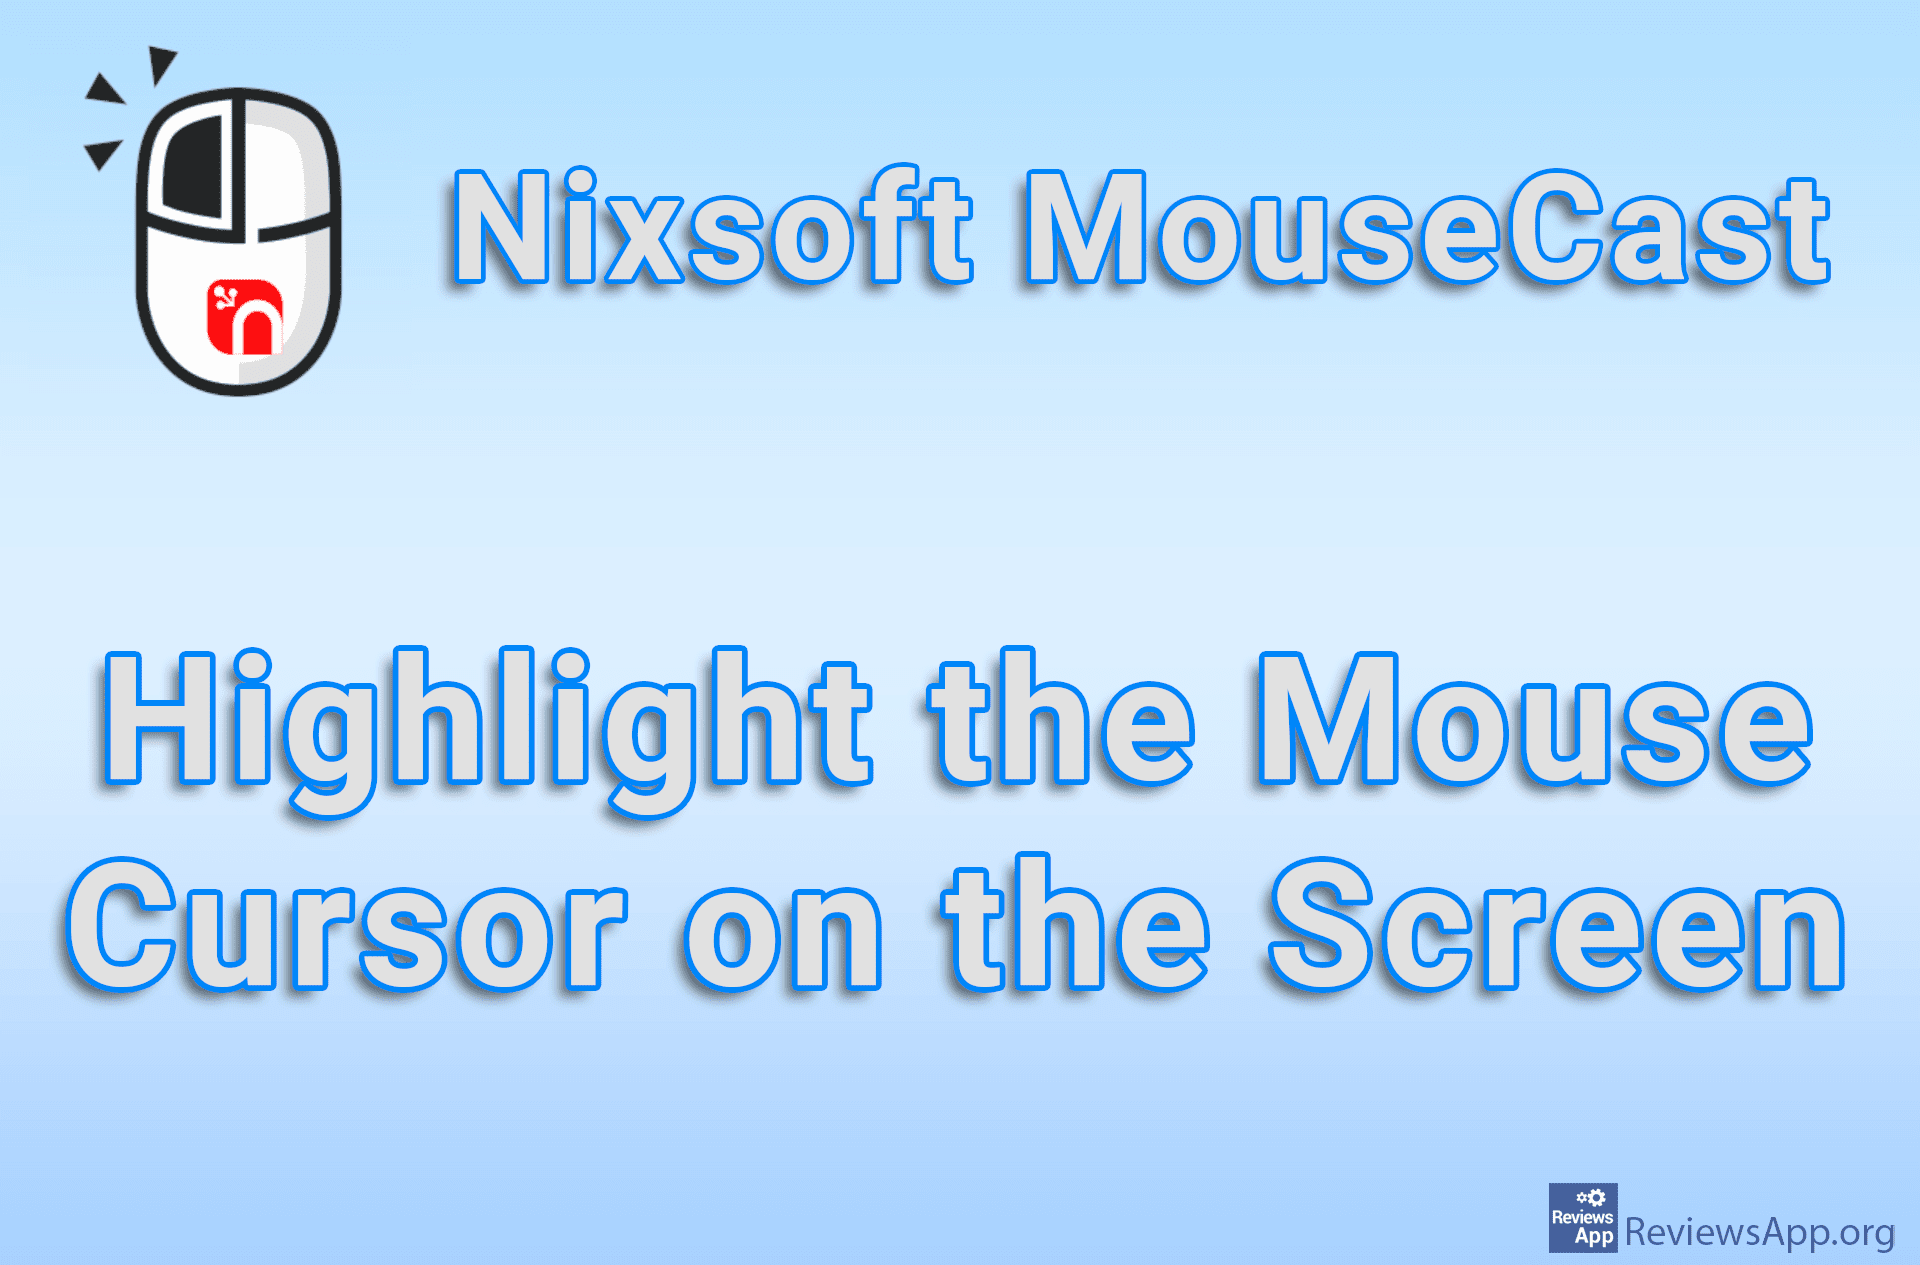 Nixsoft MouseCast – Highlight the Mouse Cursor on the Screen